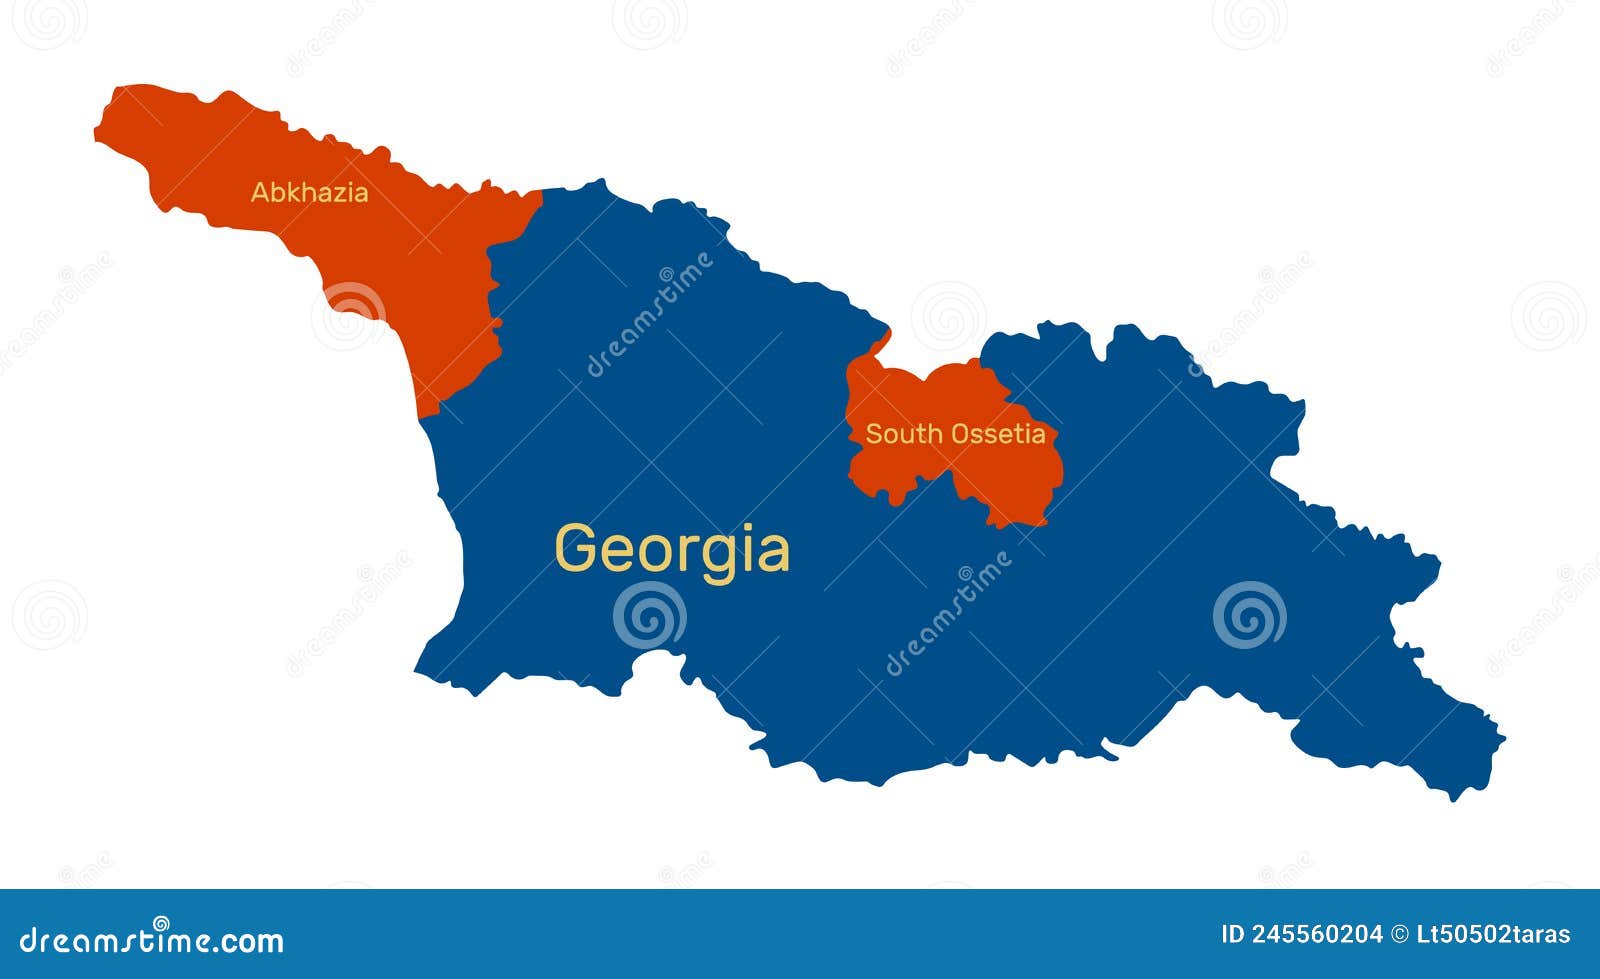 Georgia Map. Detailed Blue Silhouette. Regions Of South Ossetia And ...